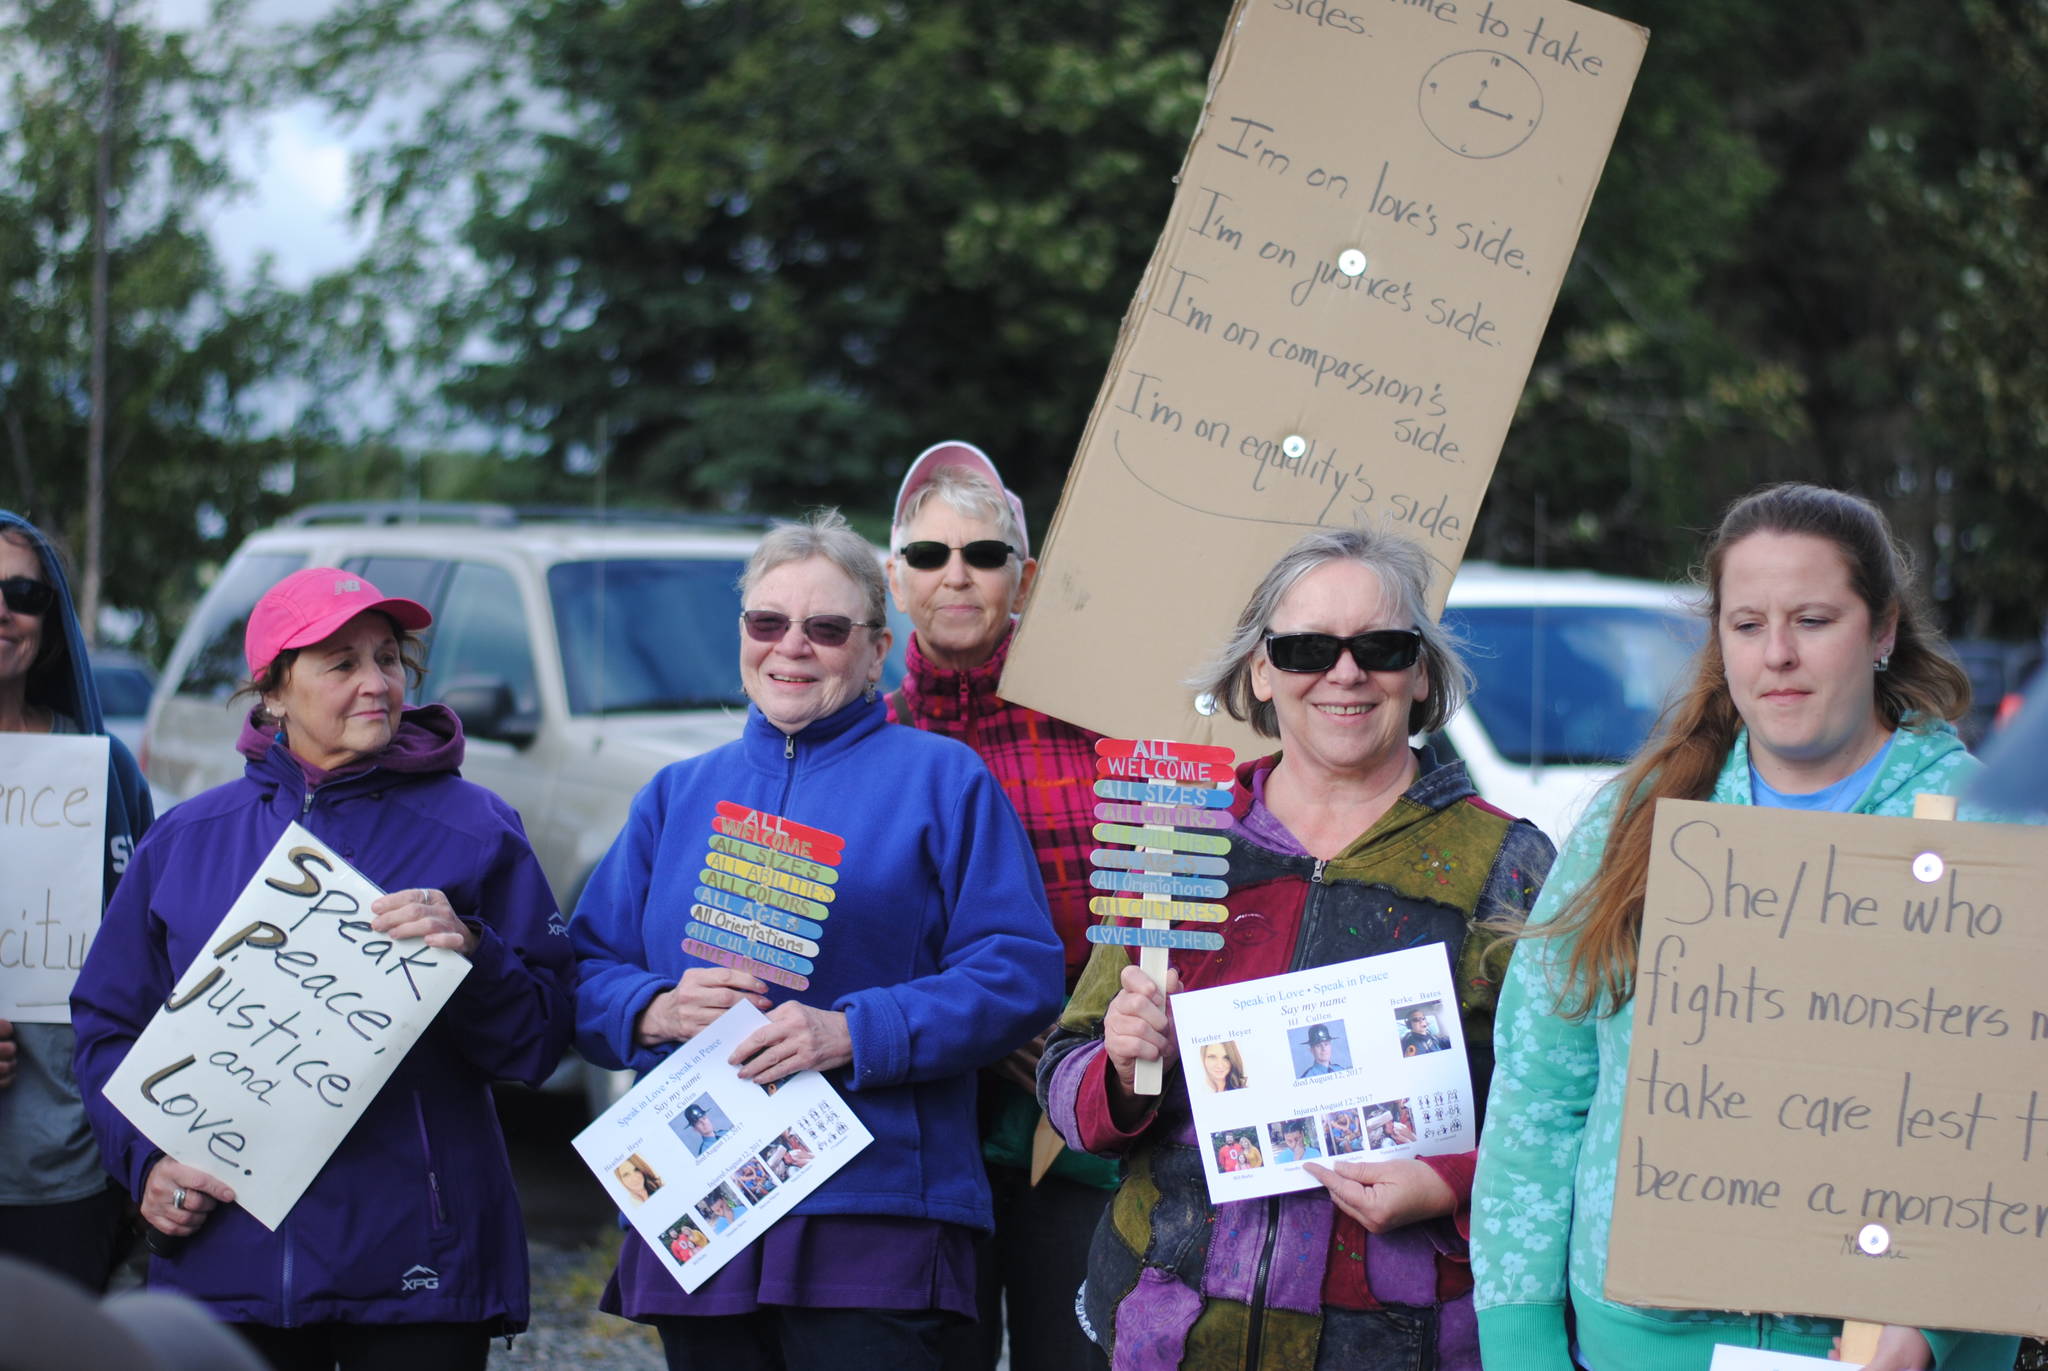 Community members gather in Soldotna Creek Park on Wednesday, August 16 in memorium of Heather Heyer, the woman killed during protests in Charlottesville, Virginia earlier this month. Organizers of the memorial walk have decided to continue the event for the next two weeks. (Photo by Kat Sorensen/Peninsula Clarion)